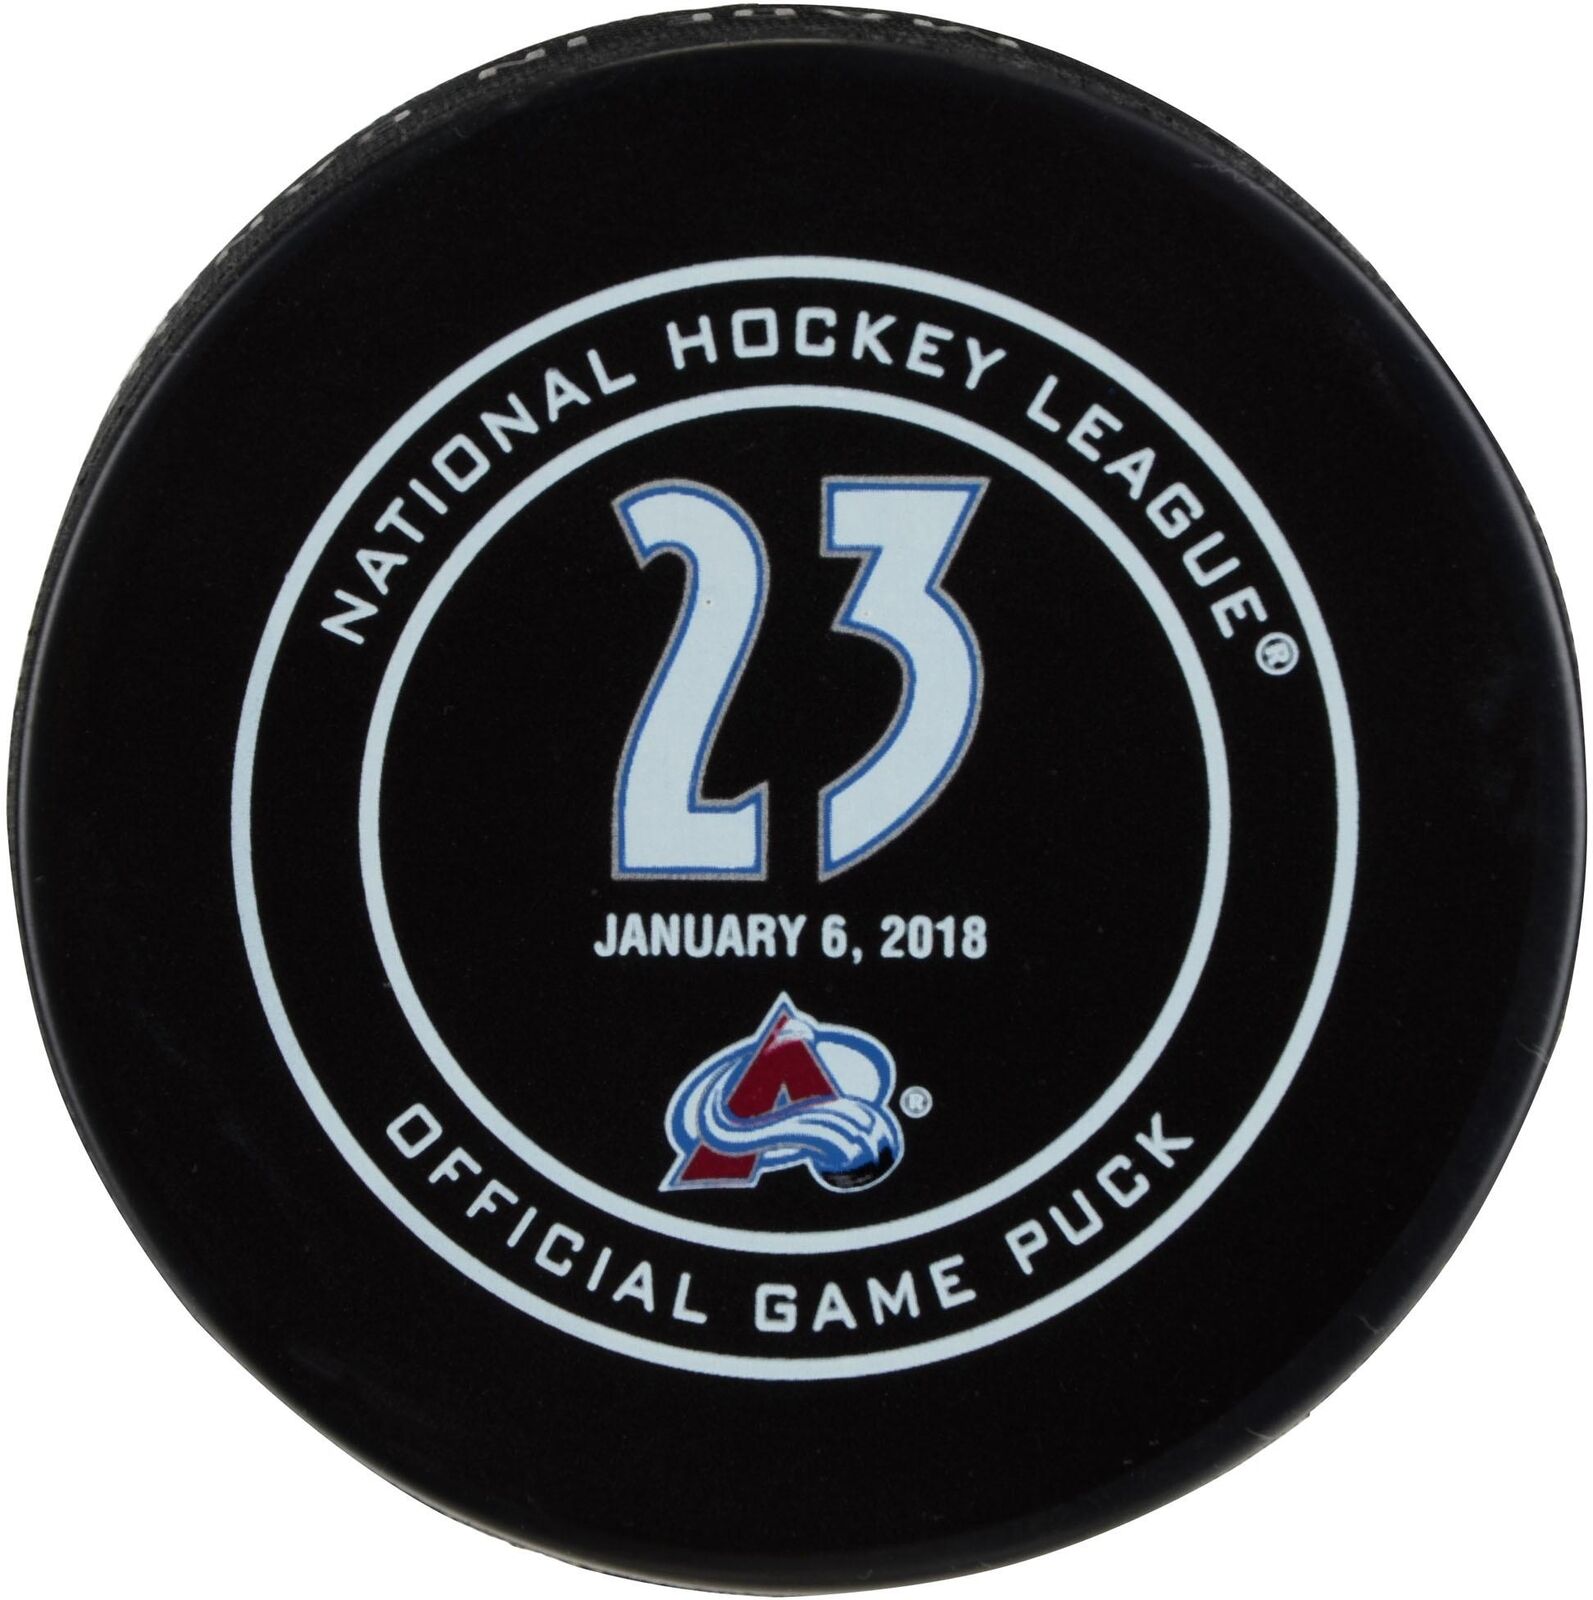 Milan Hejduk Colorado Avalanche 1/6/18 Retirement Night Official Game Puck